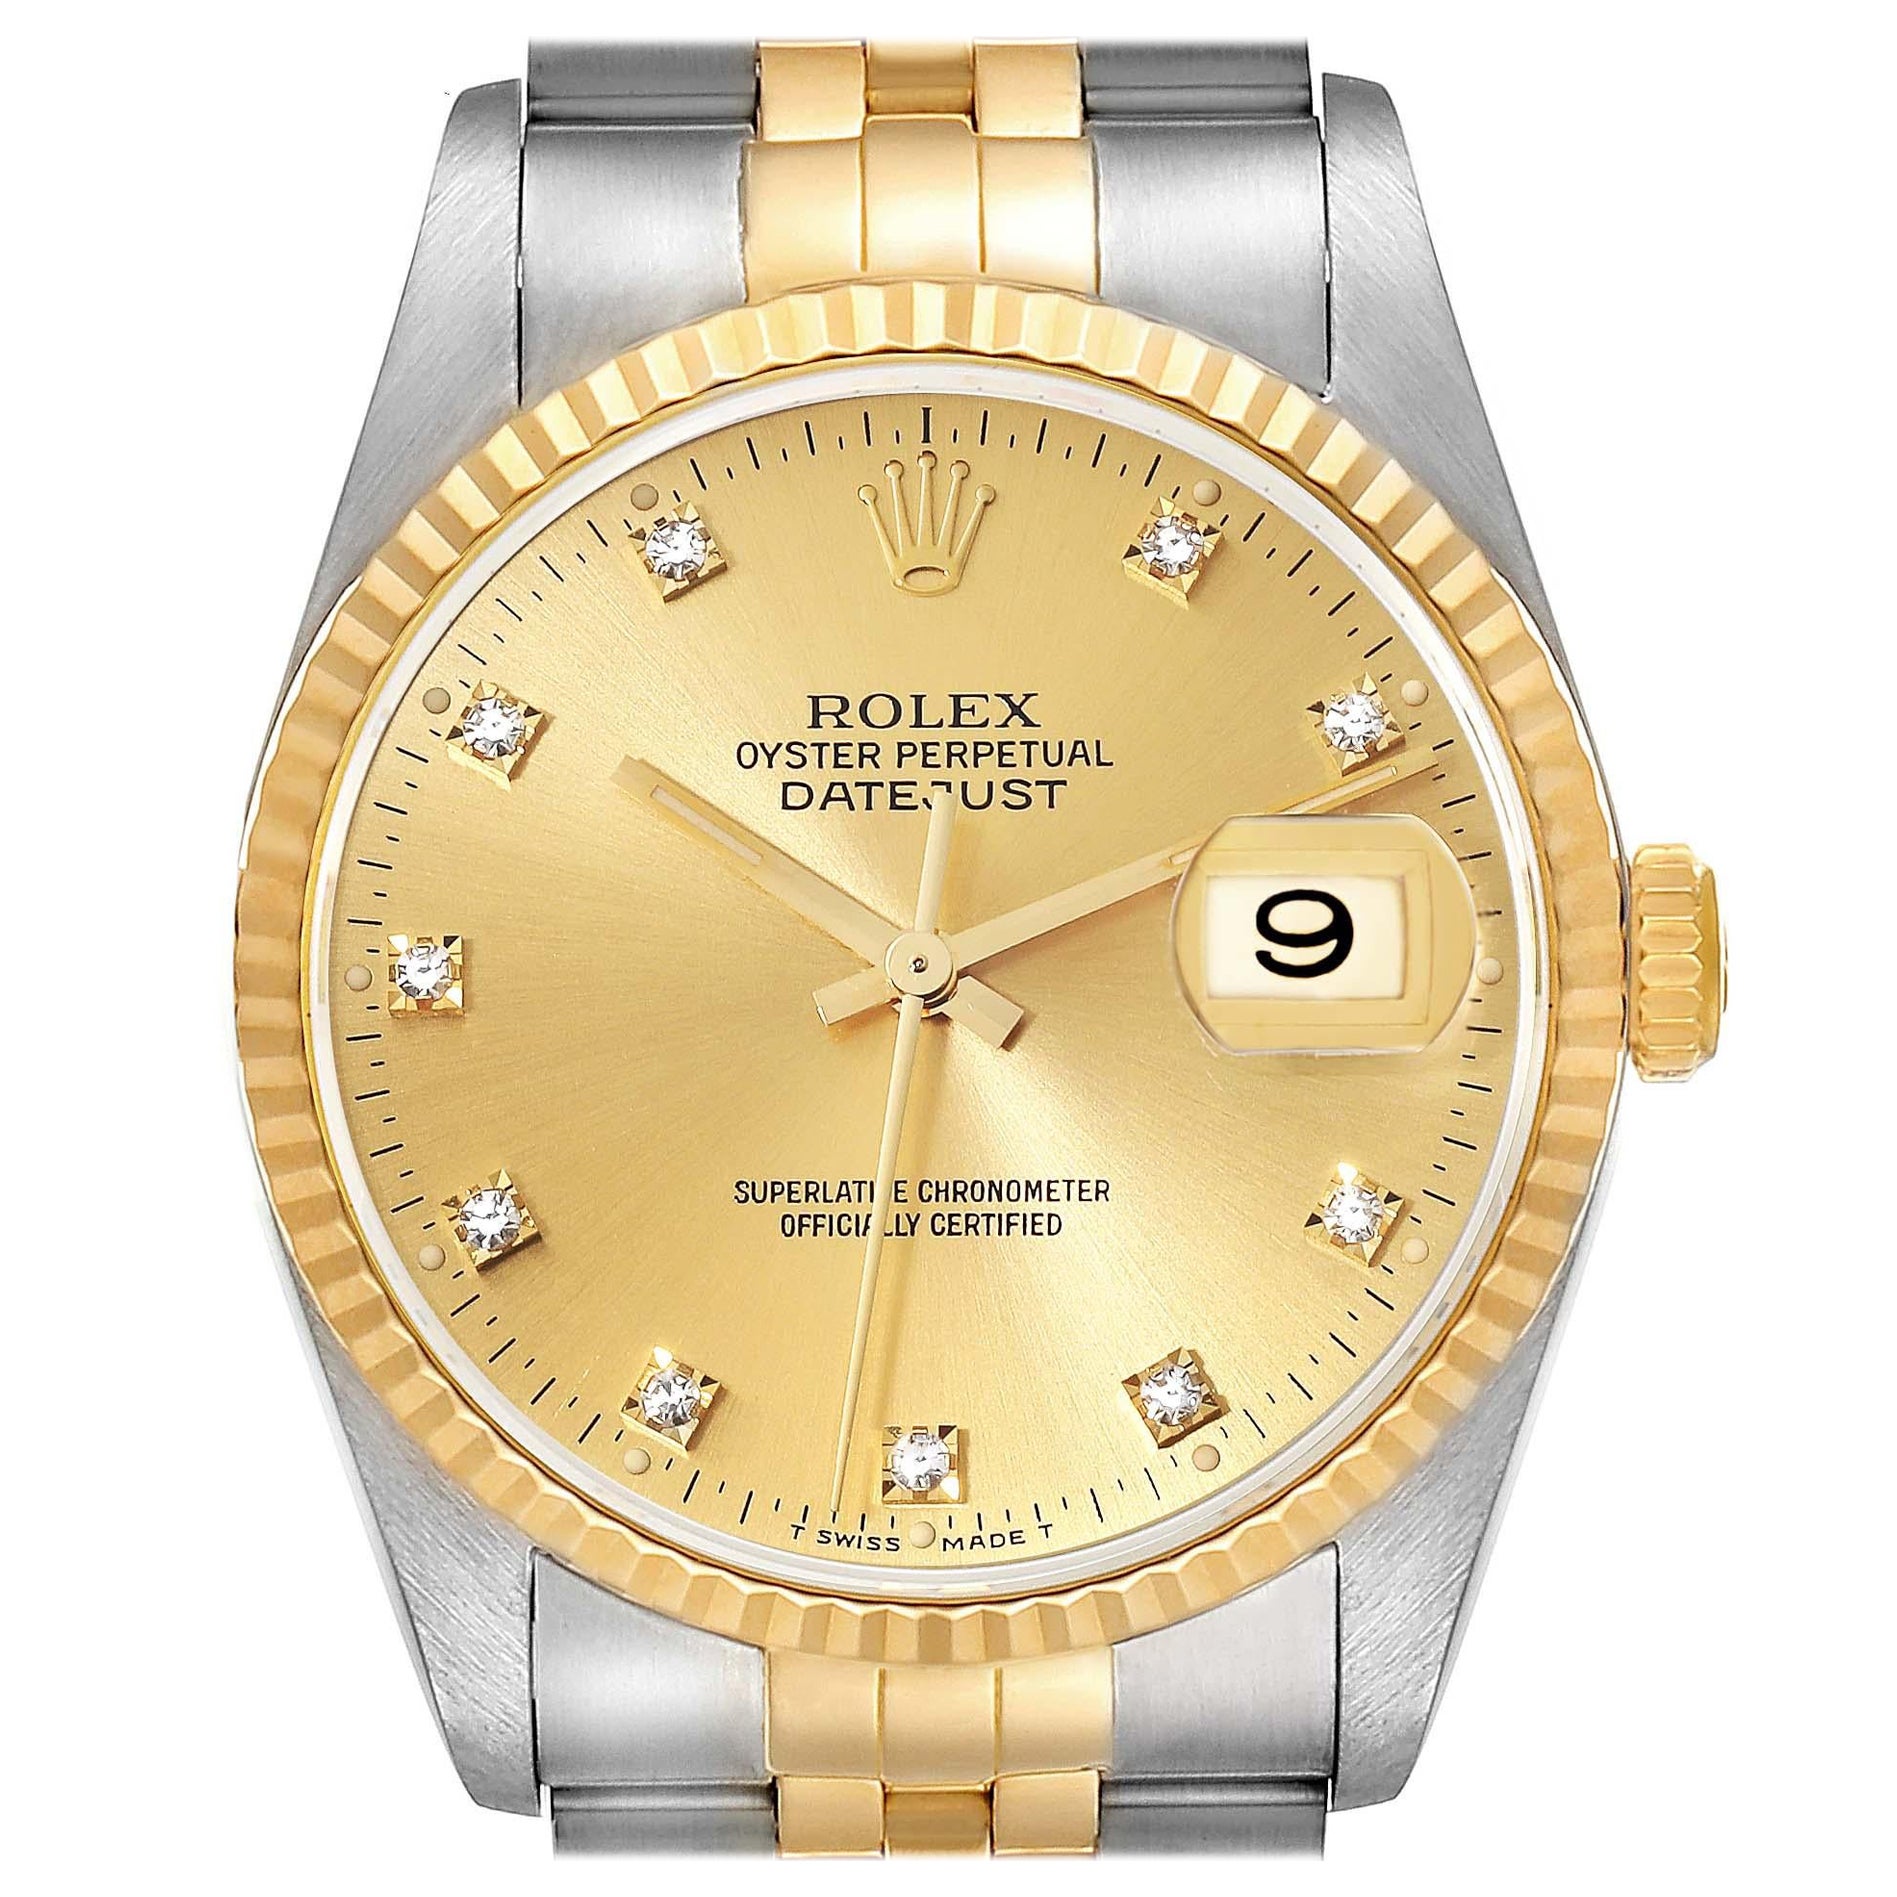 Rolex Datejust Diamond Dial Steel Yellow Gold Mens Watch 16233 Box Papers